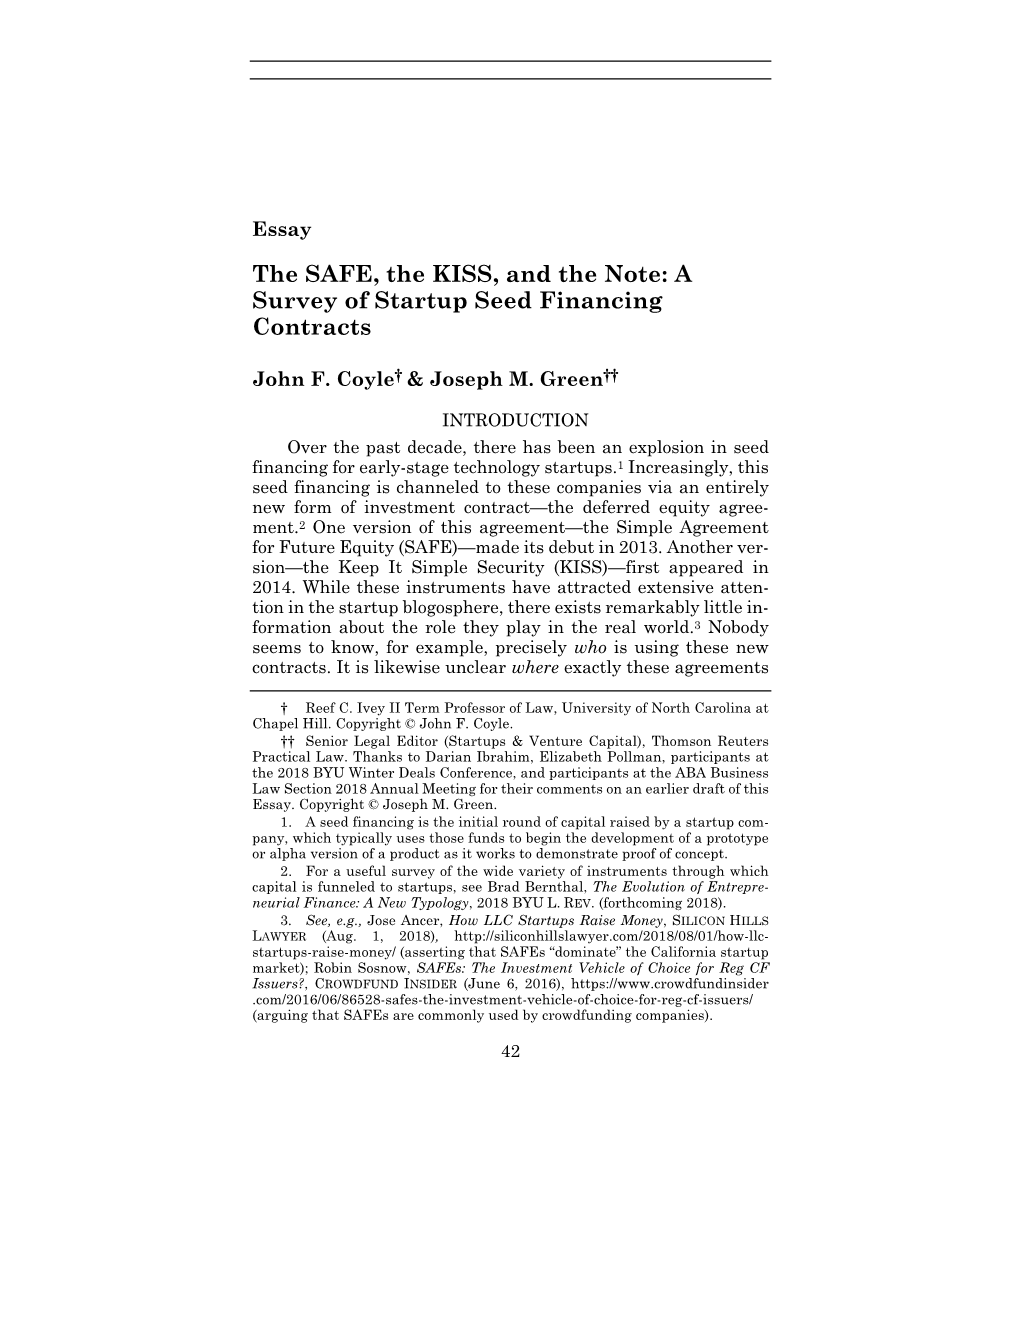 The SAFE, the KISS, and the Note: a Survey of Startup Seed Financing Contracts